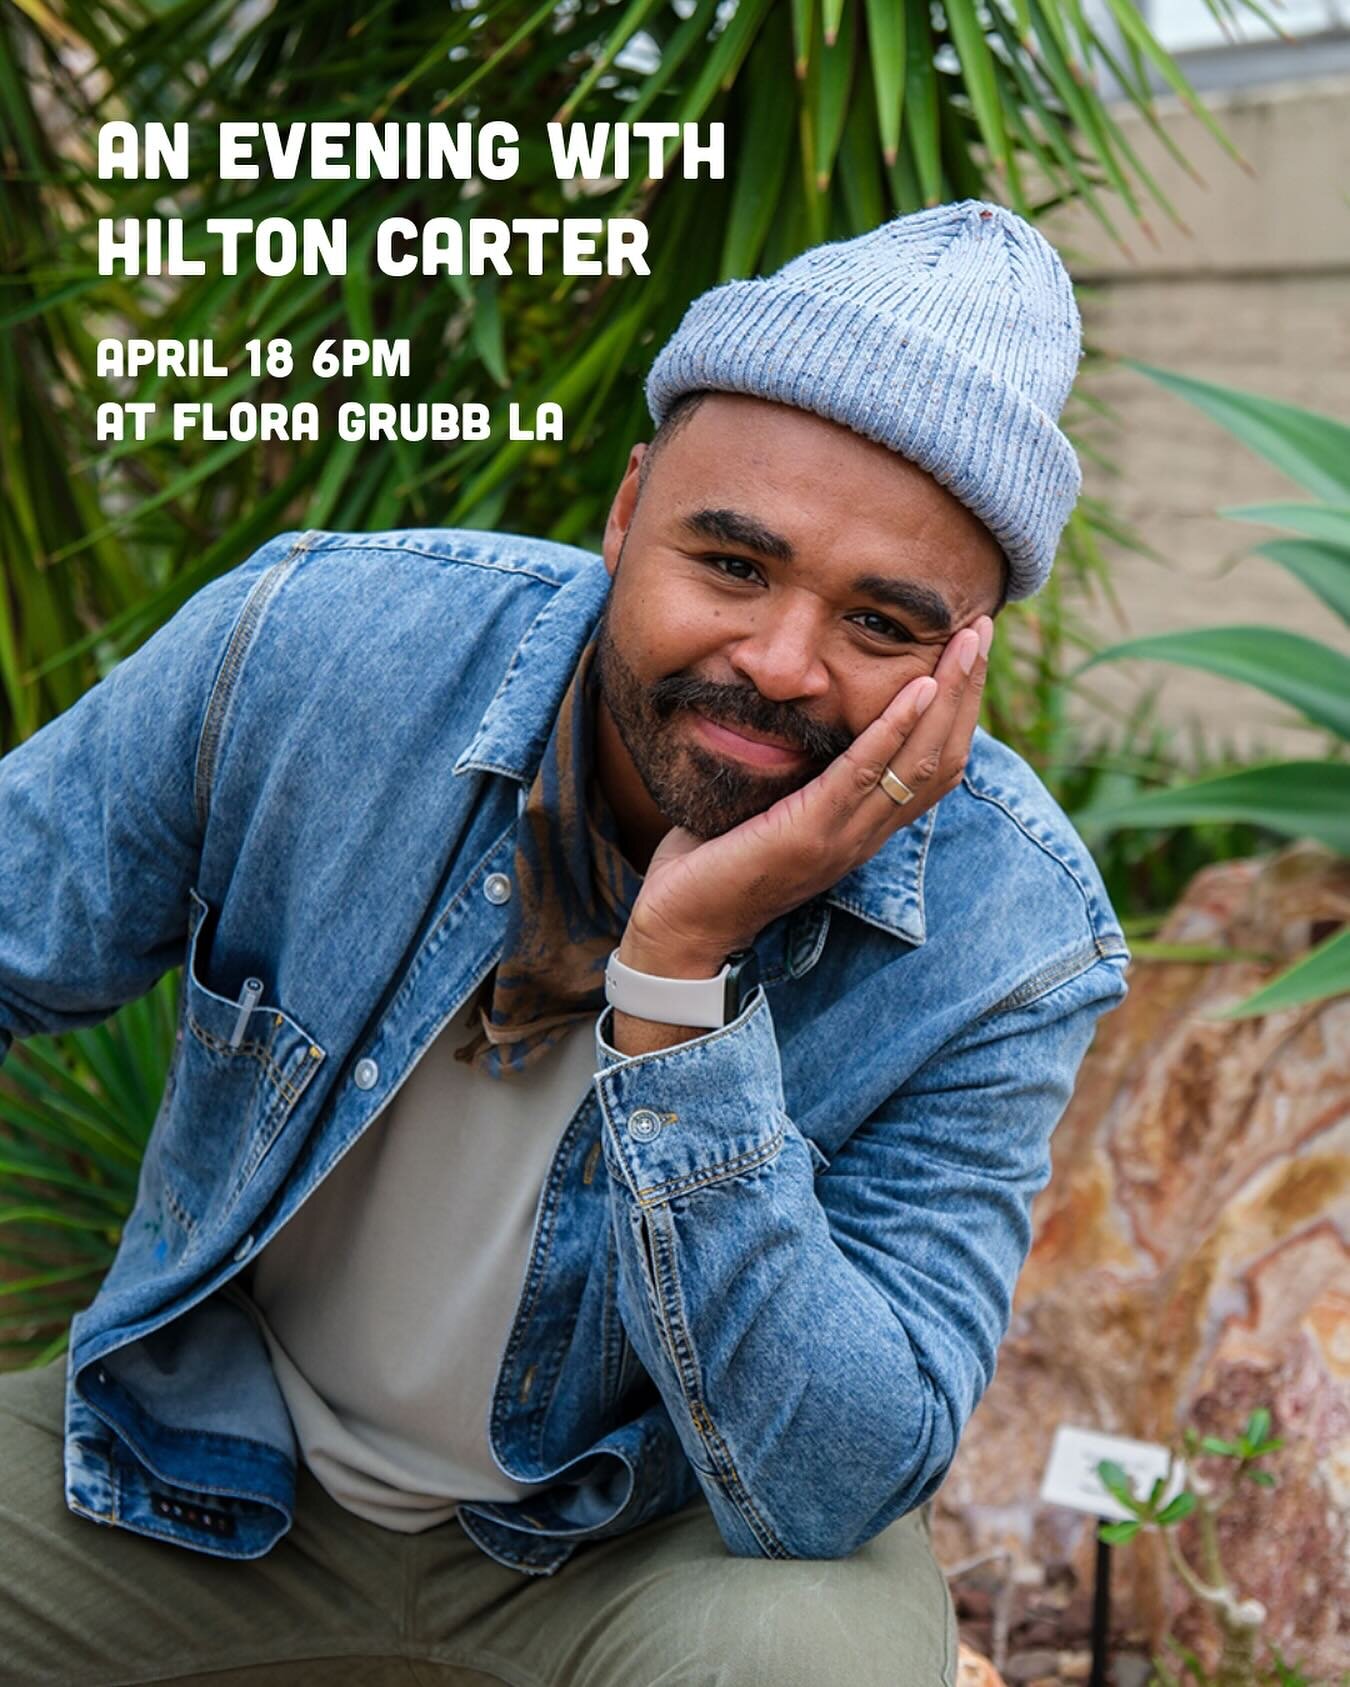 Hilton Carter&rsquo;s new book is out today! And we can&rsquo;t wait to host his LA book tour event on 4/18 at Flora Grubb in Marina del Rey. Join us for an evening with @hiltoncarter &mdash; get your tickets now on our events page! Link in bio.

#fl